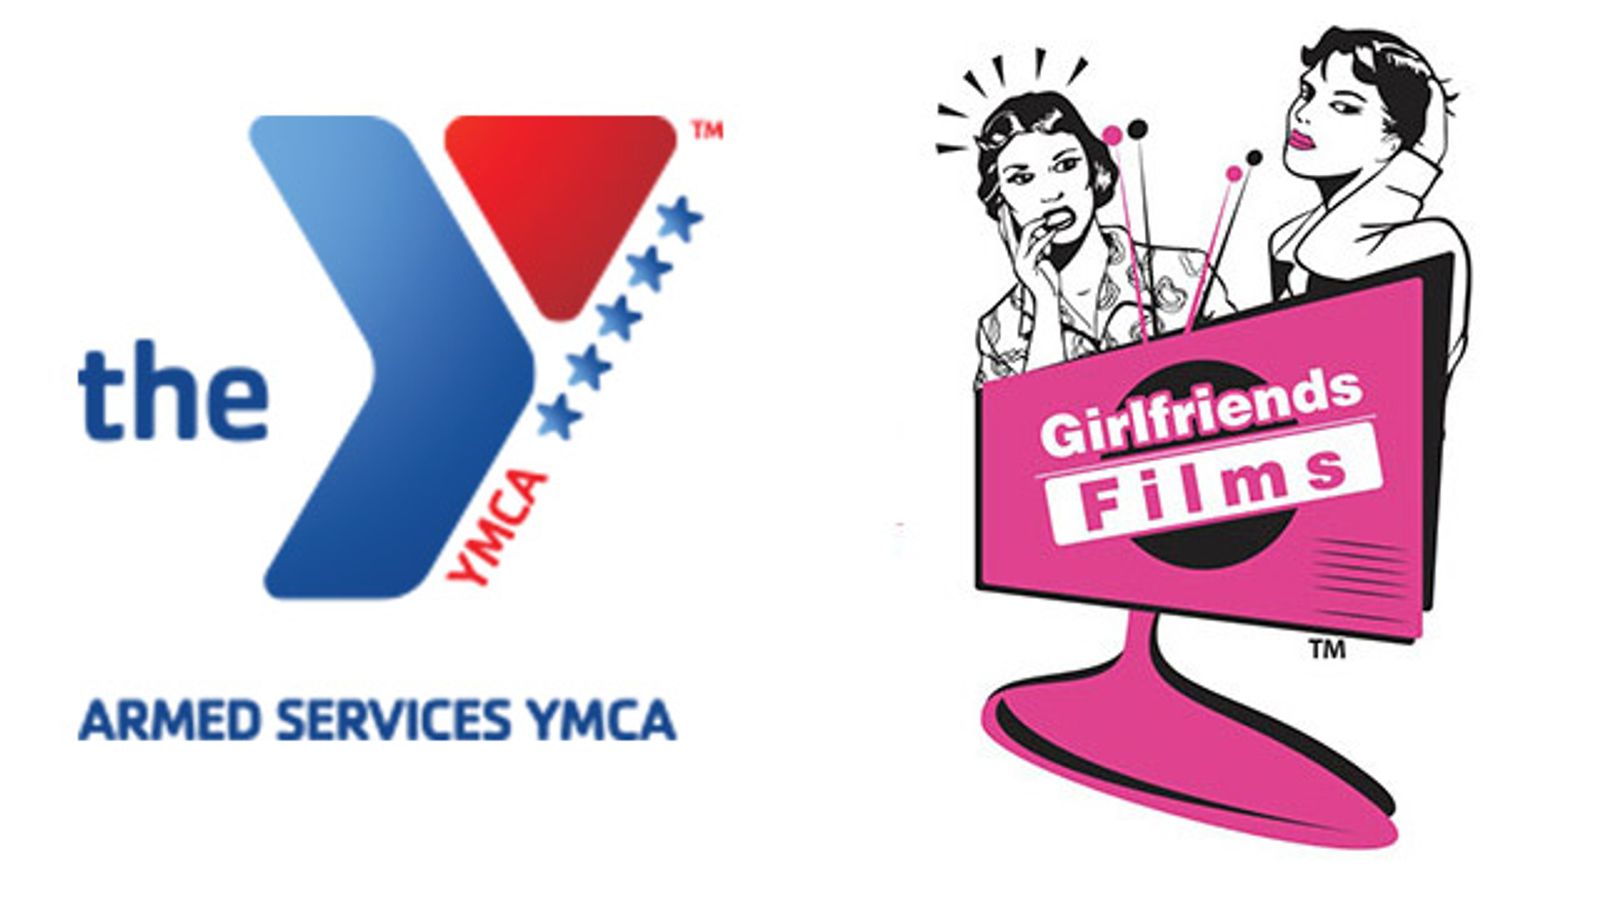 Girlfriends Films Donates $1000 to Armed Services YMCA